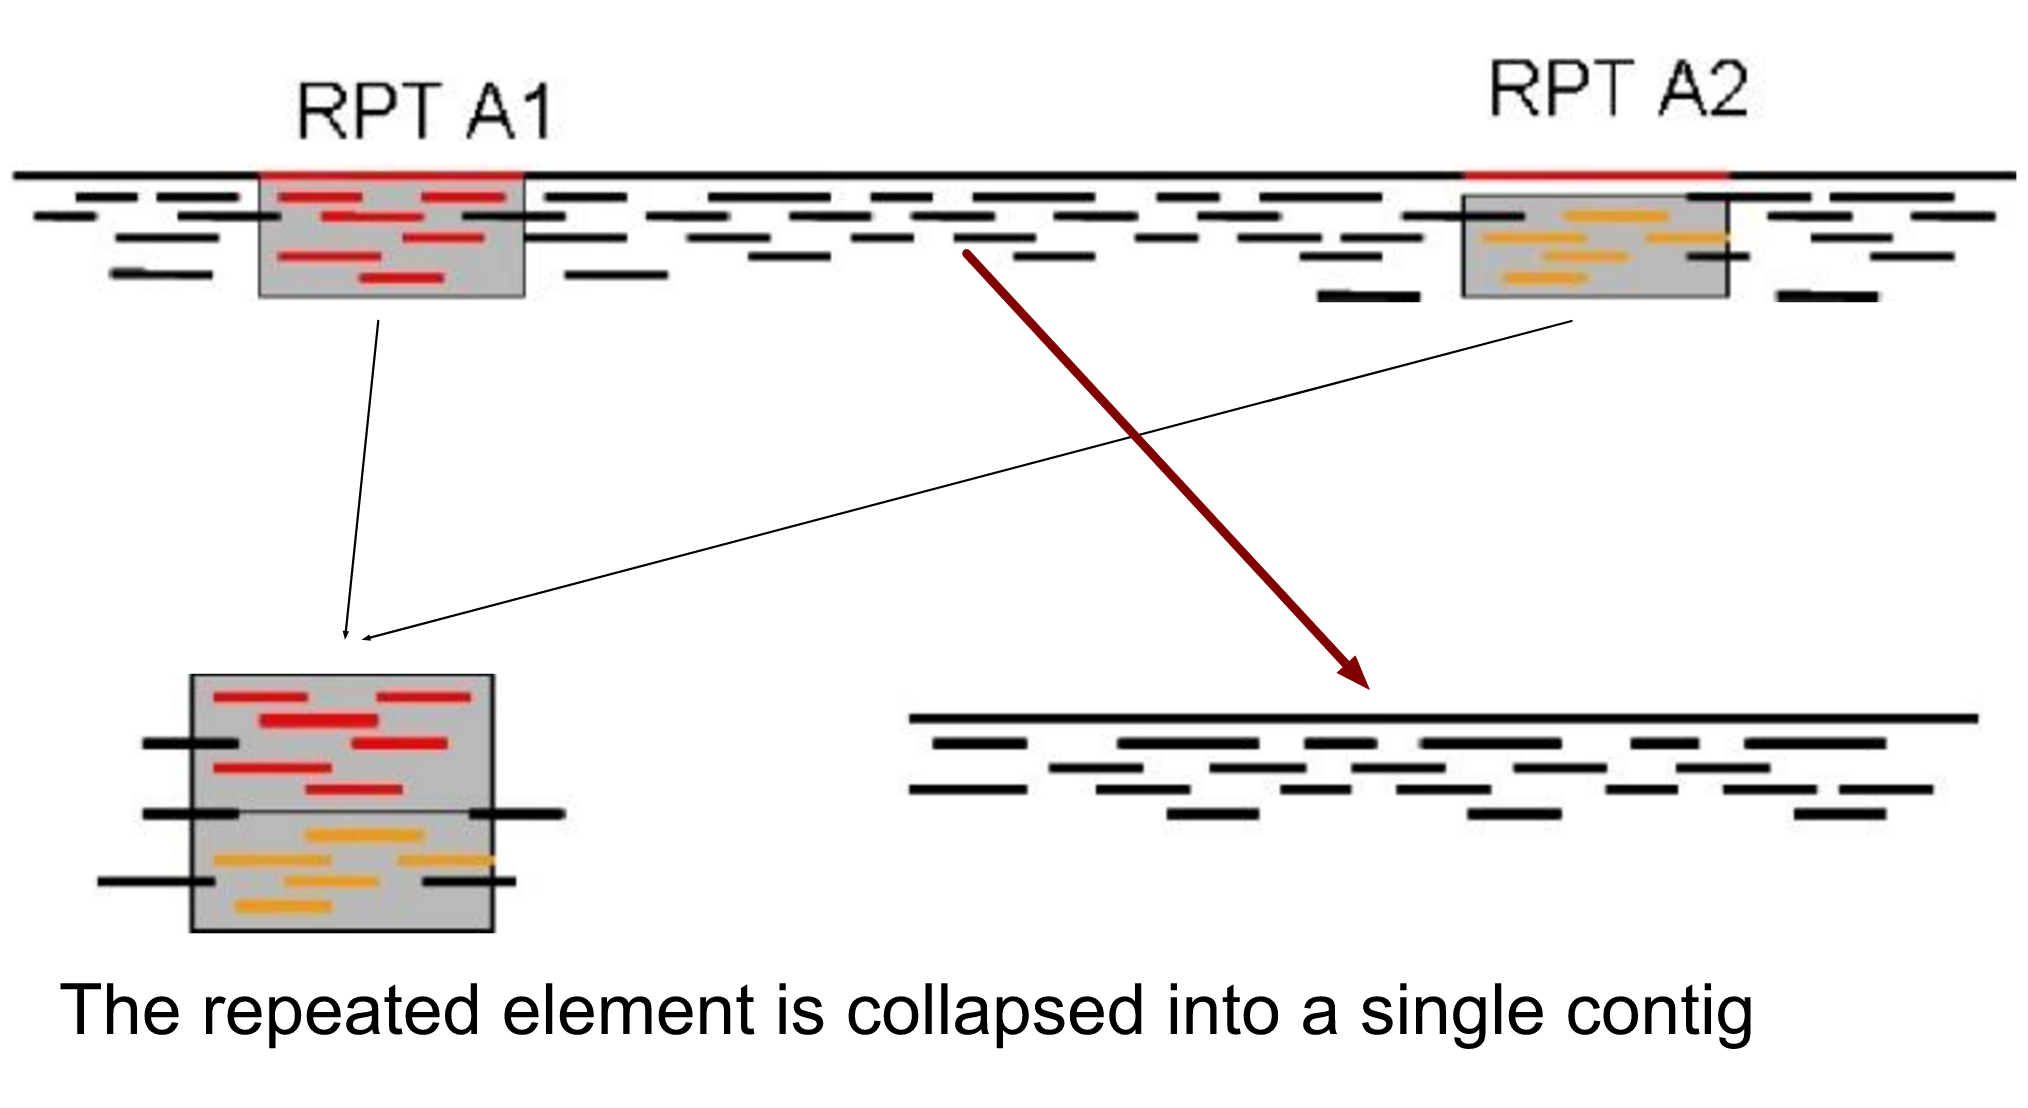 A genome with a repeat in two distinct locations is shown. Arrows point to the repeats being collapsed, and then the in-between bits being cut out of the sequence completely.